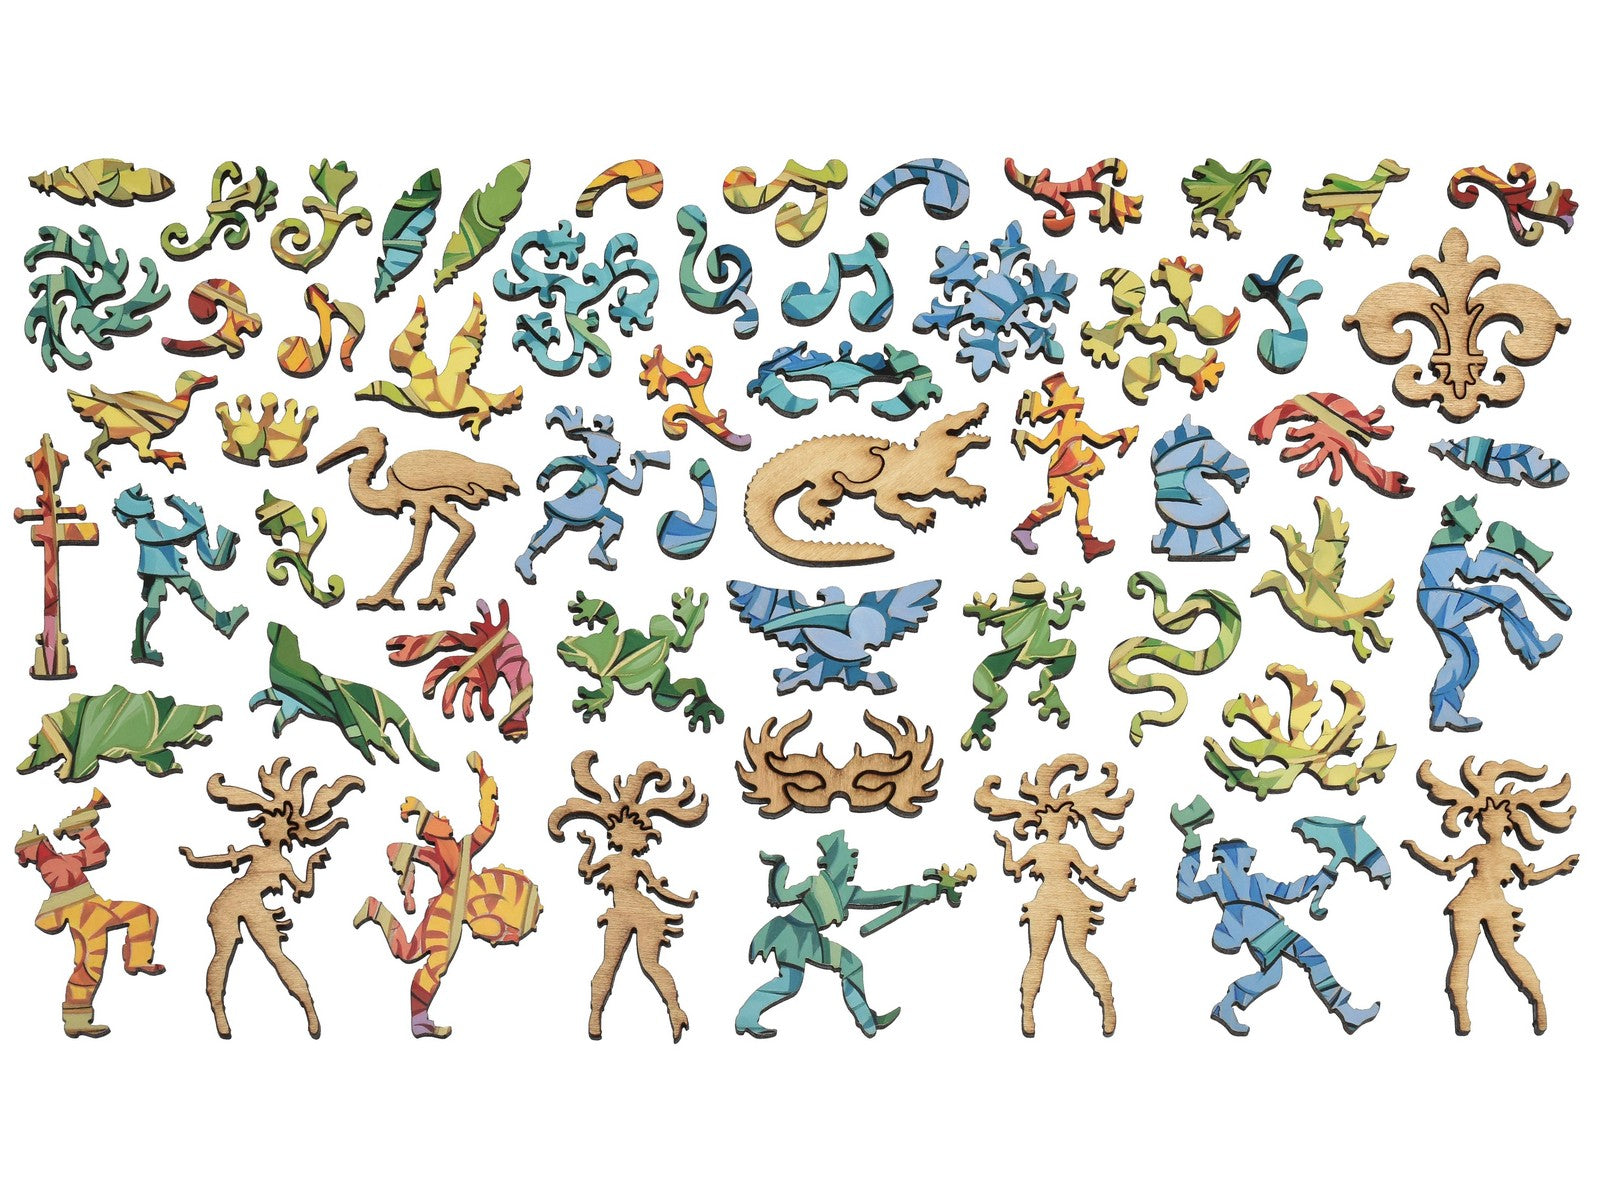 The whimsies that can be found in the puzzle Pinwheel Gator.